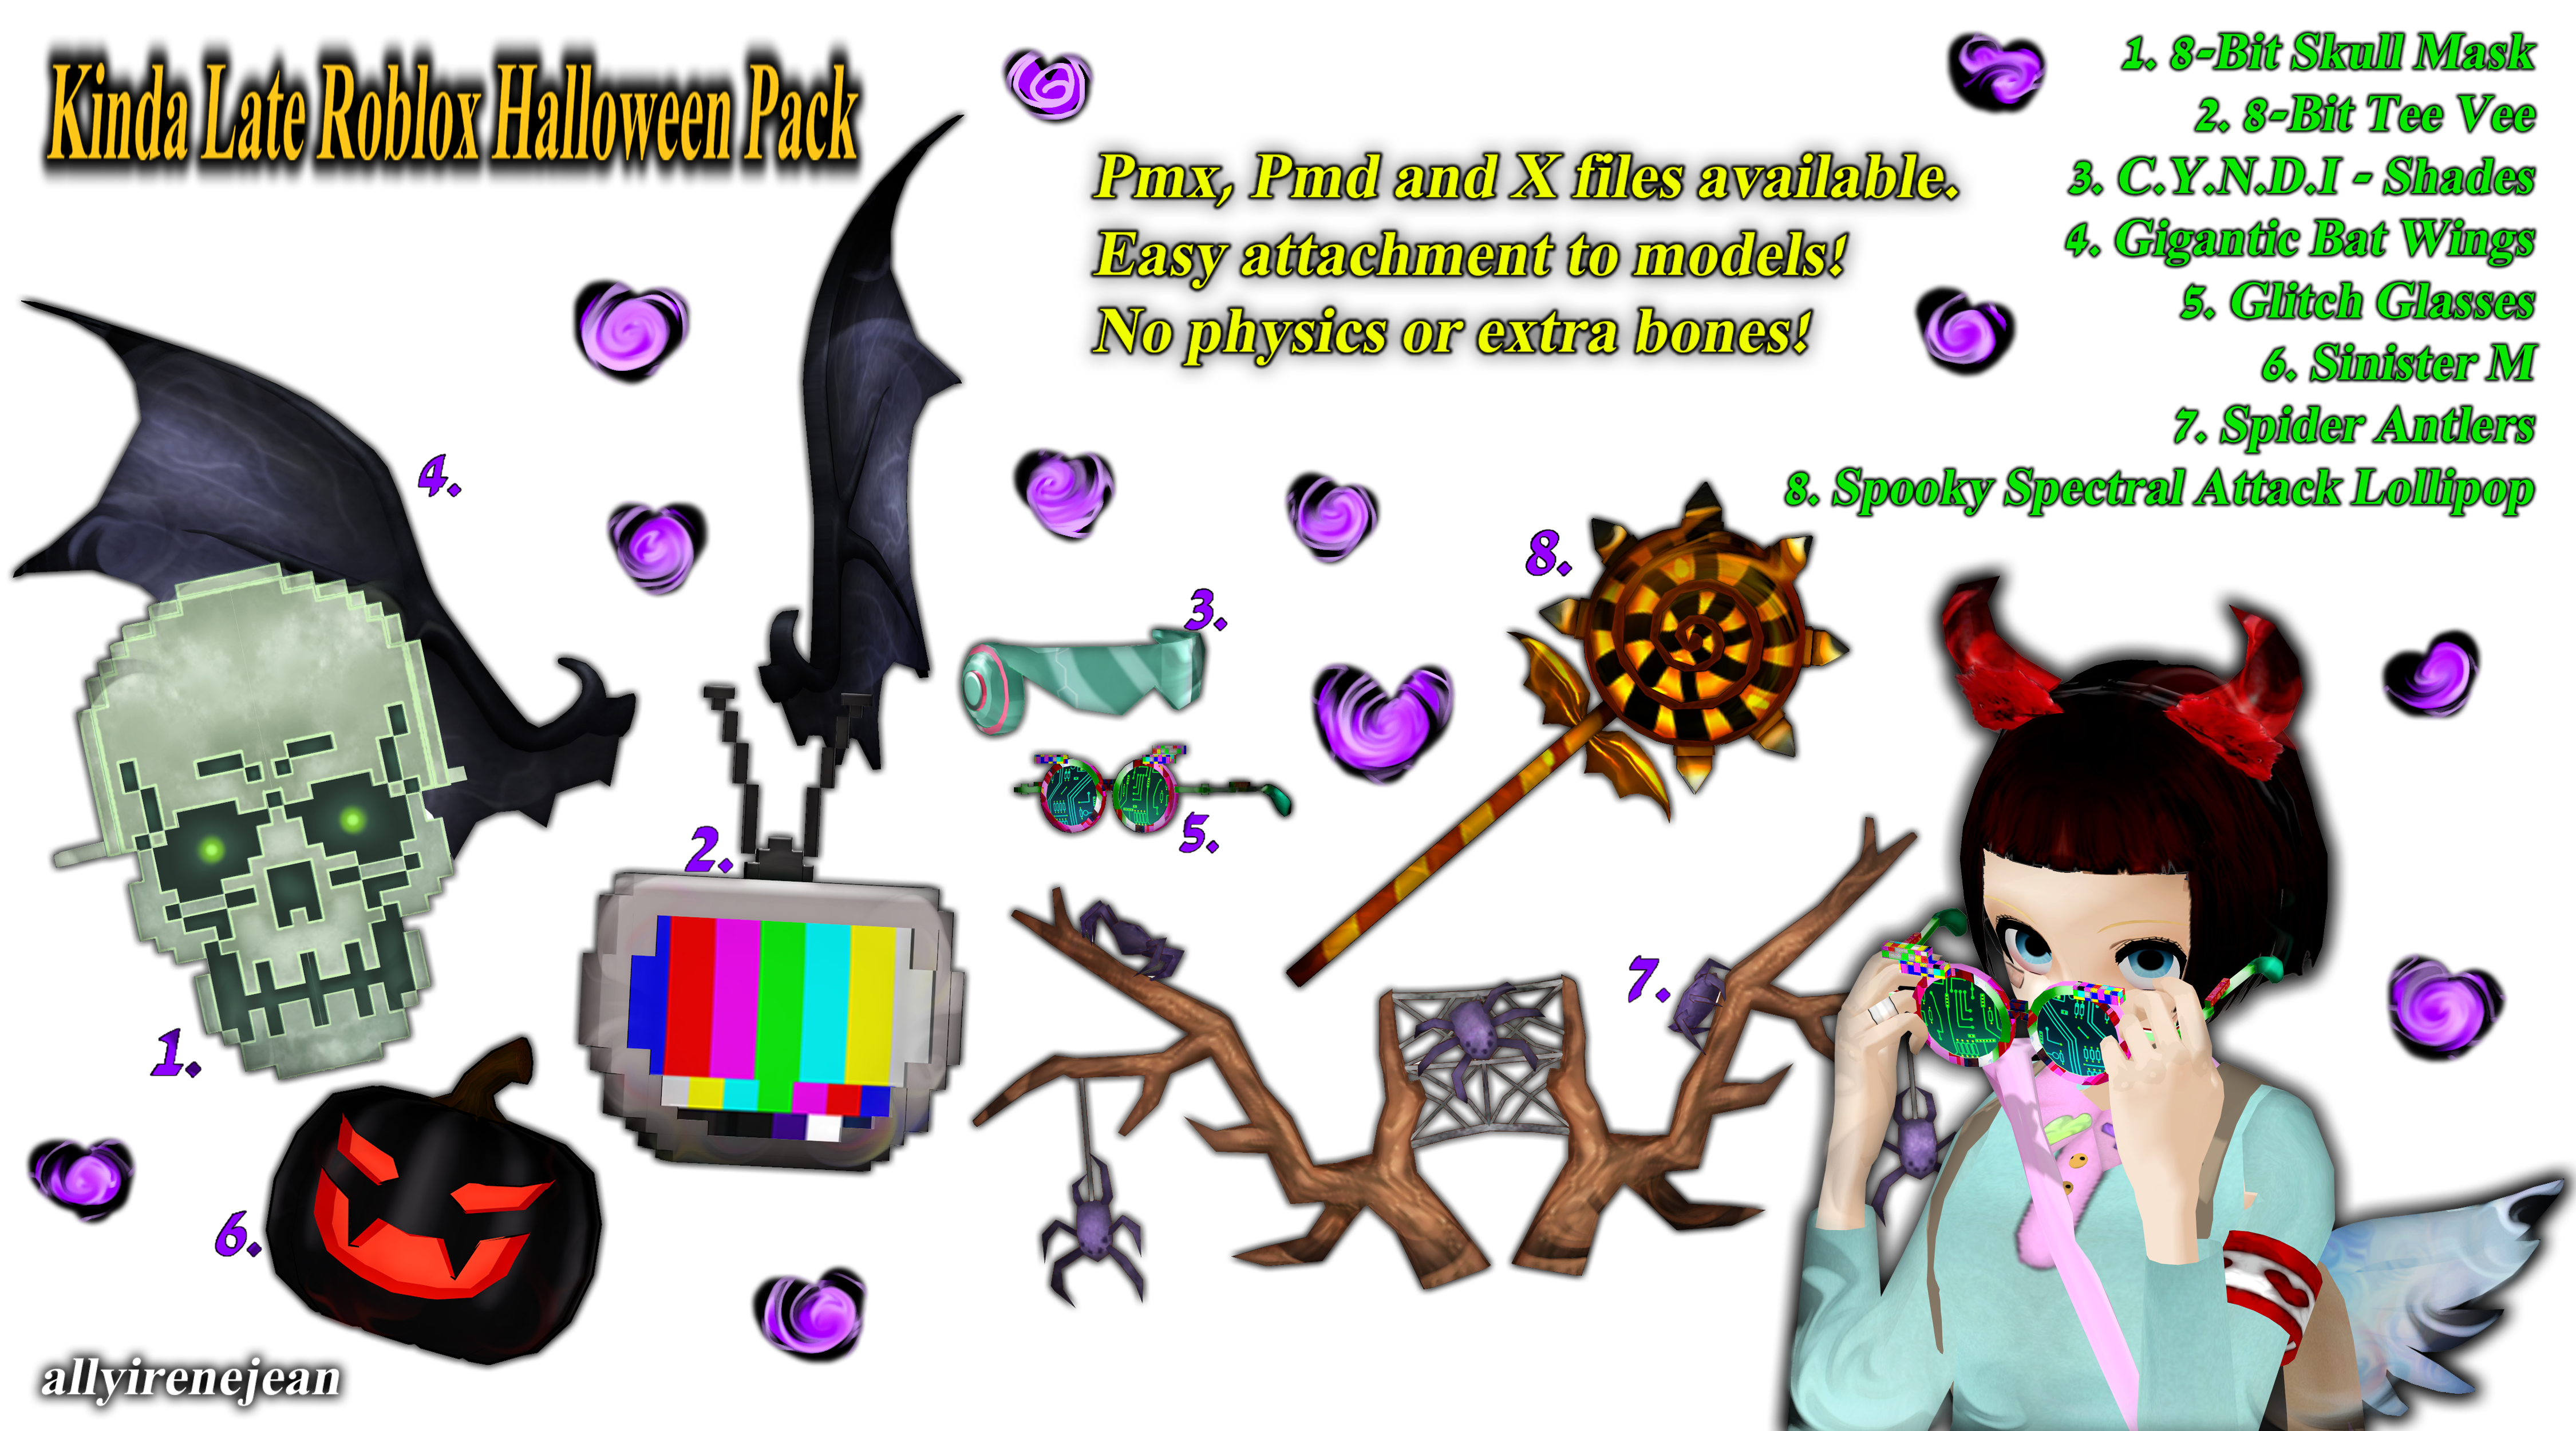 Mmd To Roblox 2018 Halloween Pack By Allyirenejean On Deviantart